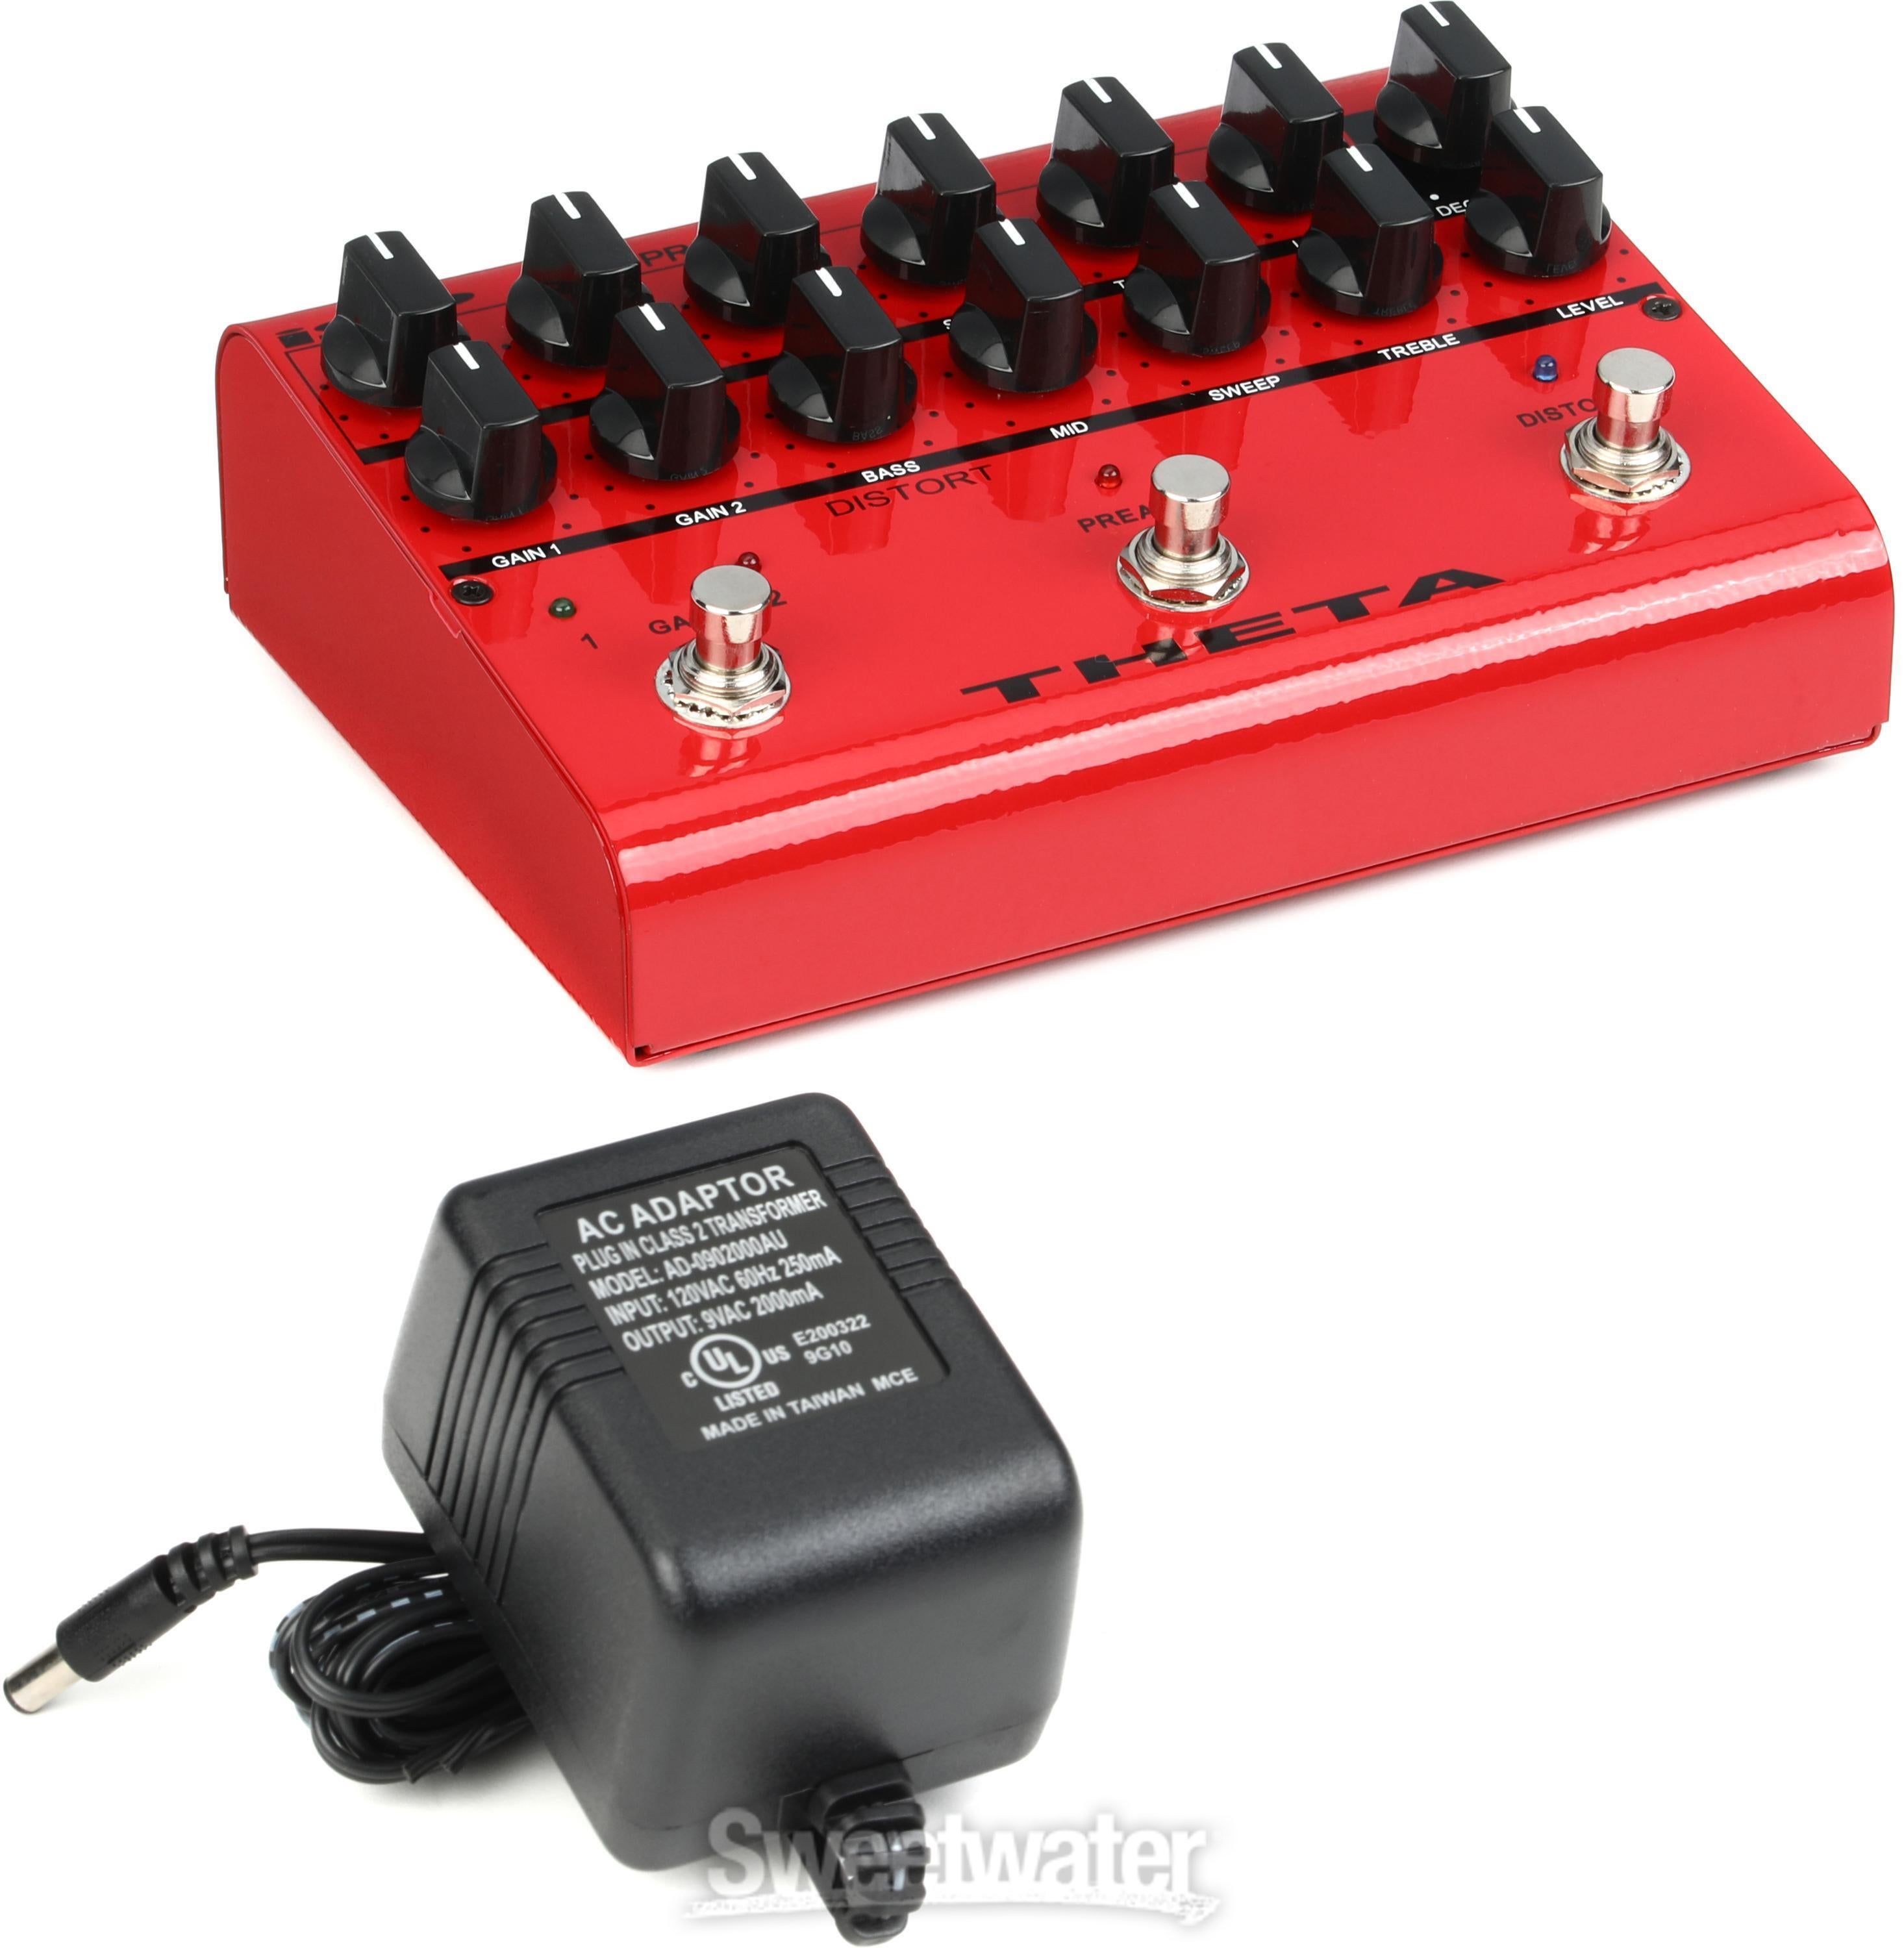 ISP Technologies Theta Preamp Distortion Pedal with Decimator Noise  Reduction